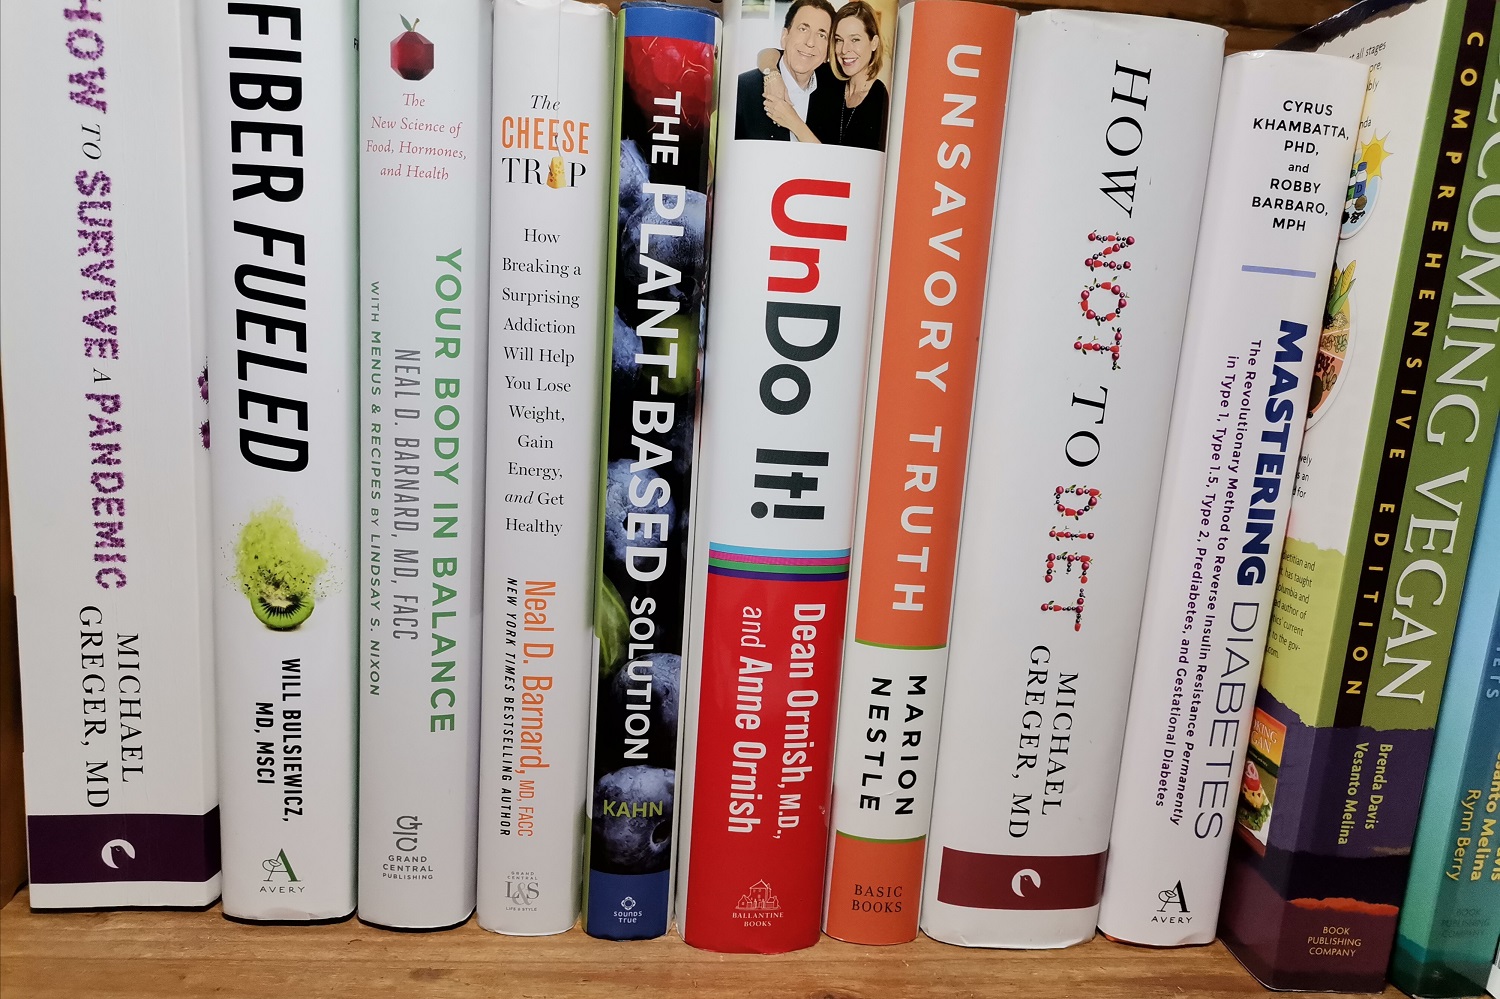 Books on nutrition